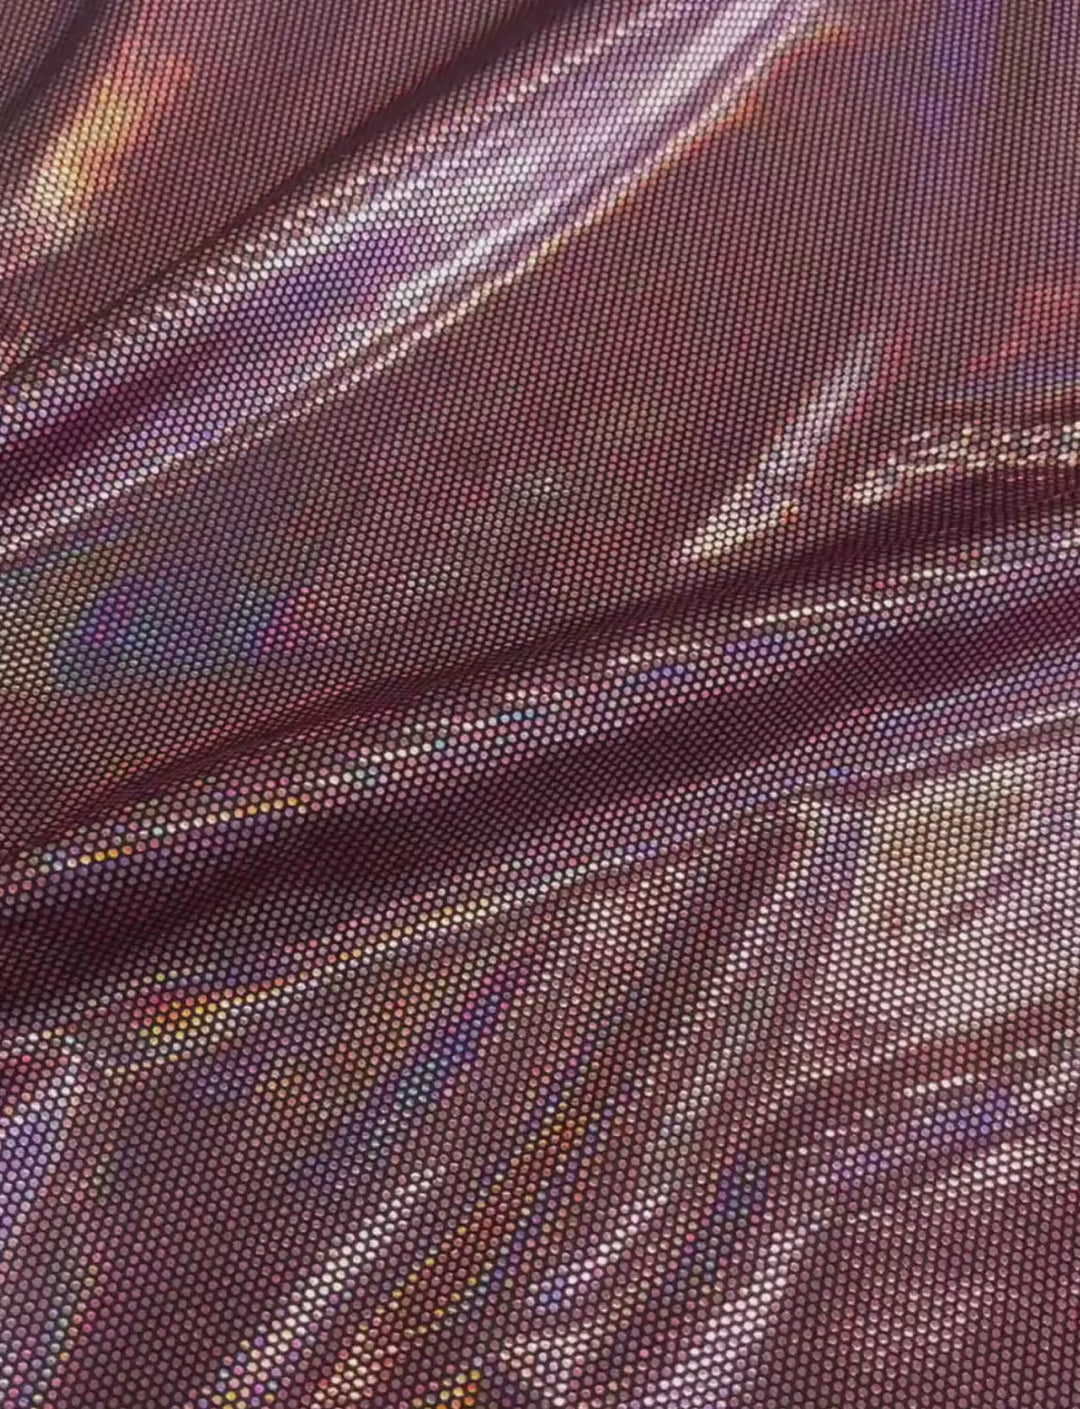 Pink spotted foil spandex fabric.